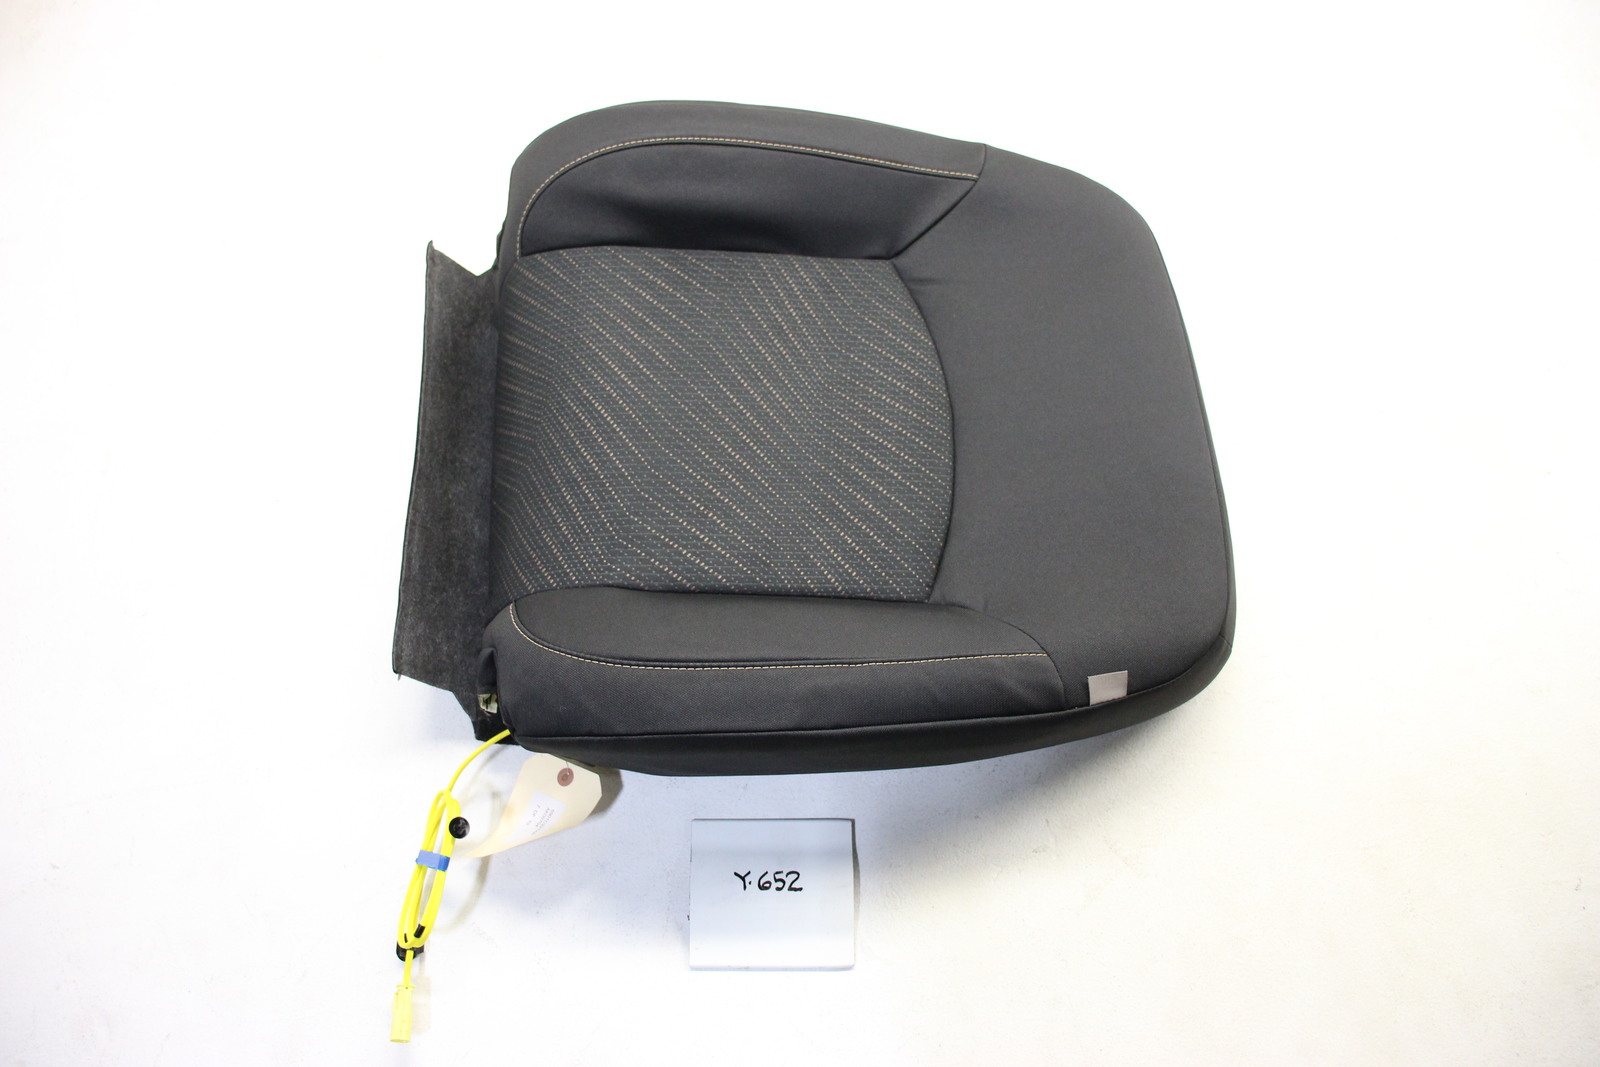 Primary image for New OEM Upper Seat Cover Cushion 2014-2015 Outlander Sport Black 6901C331XB LH